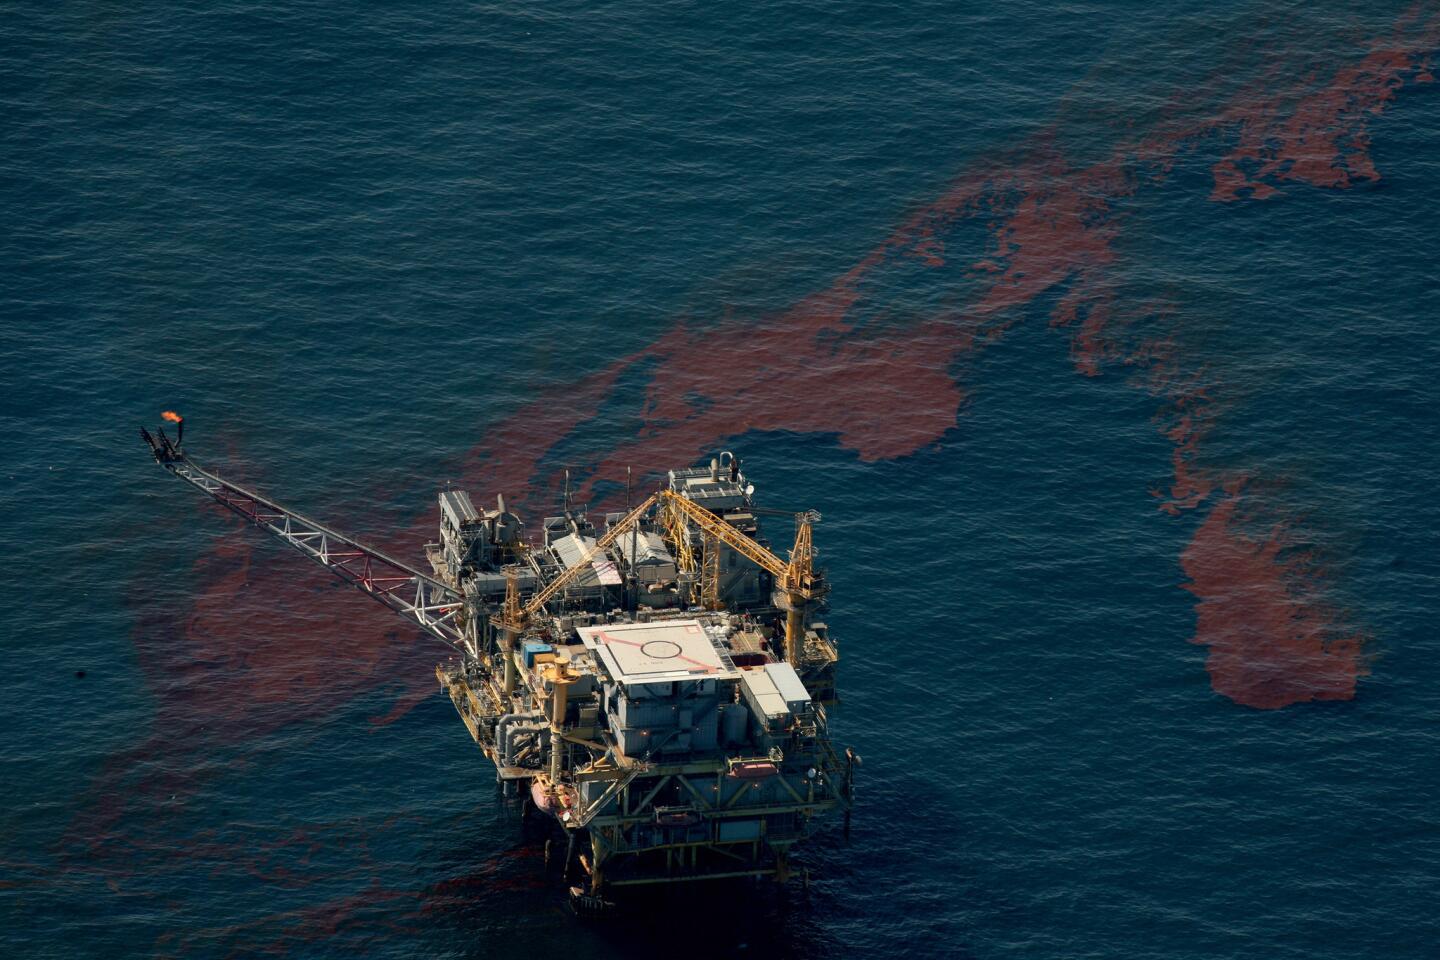 Gulf oil spill: BP's well gushing at a higher rate - Los Angeles Times